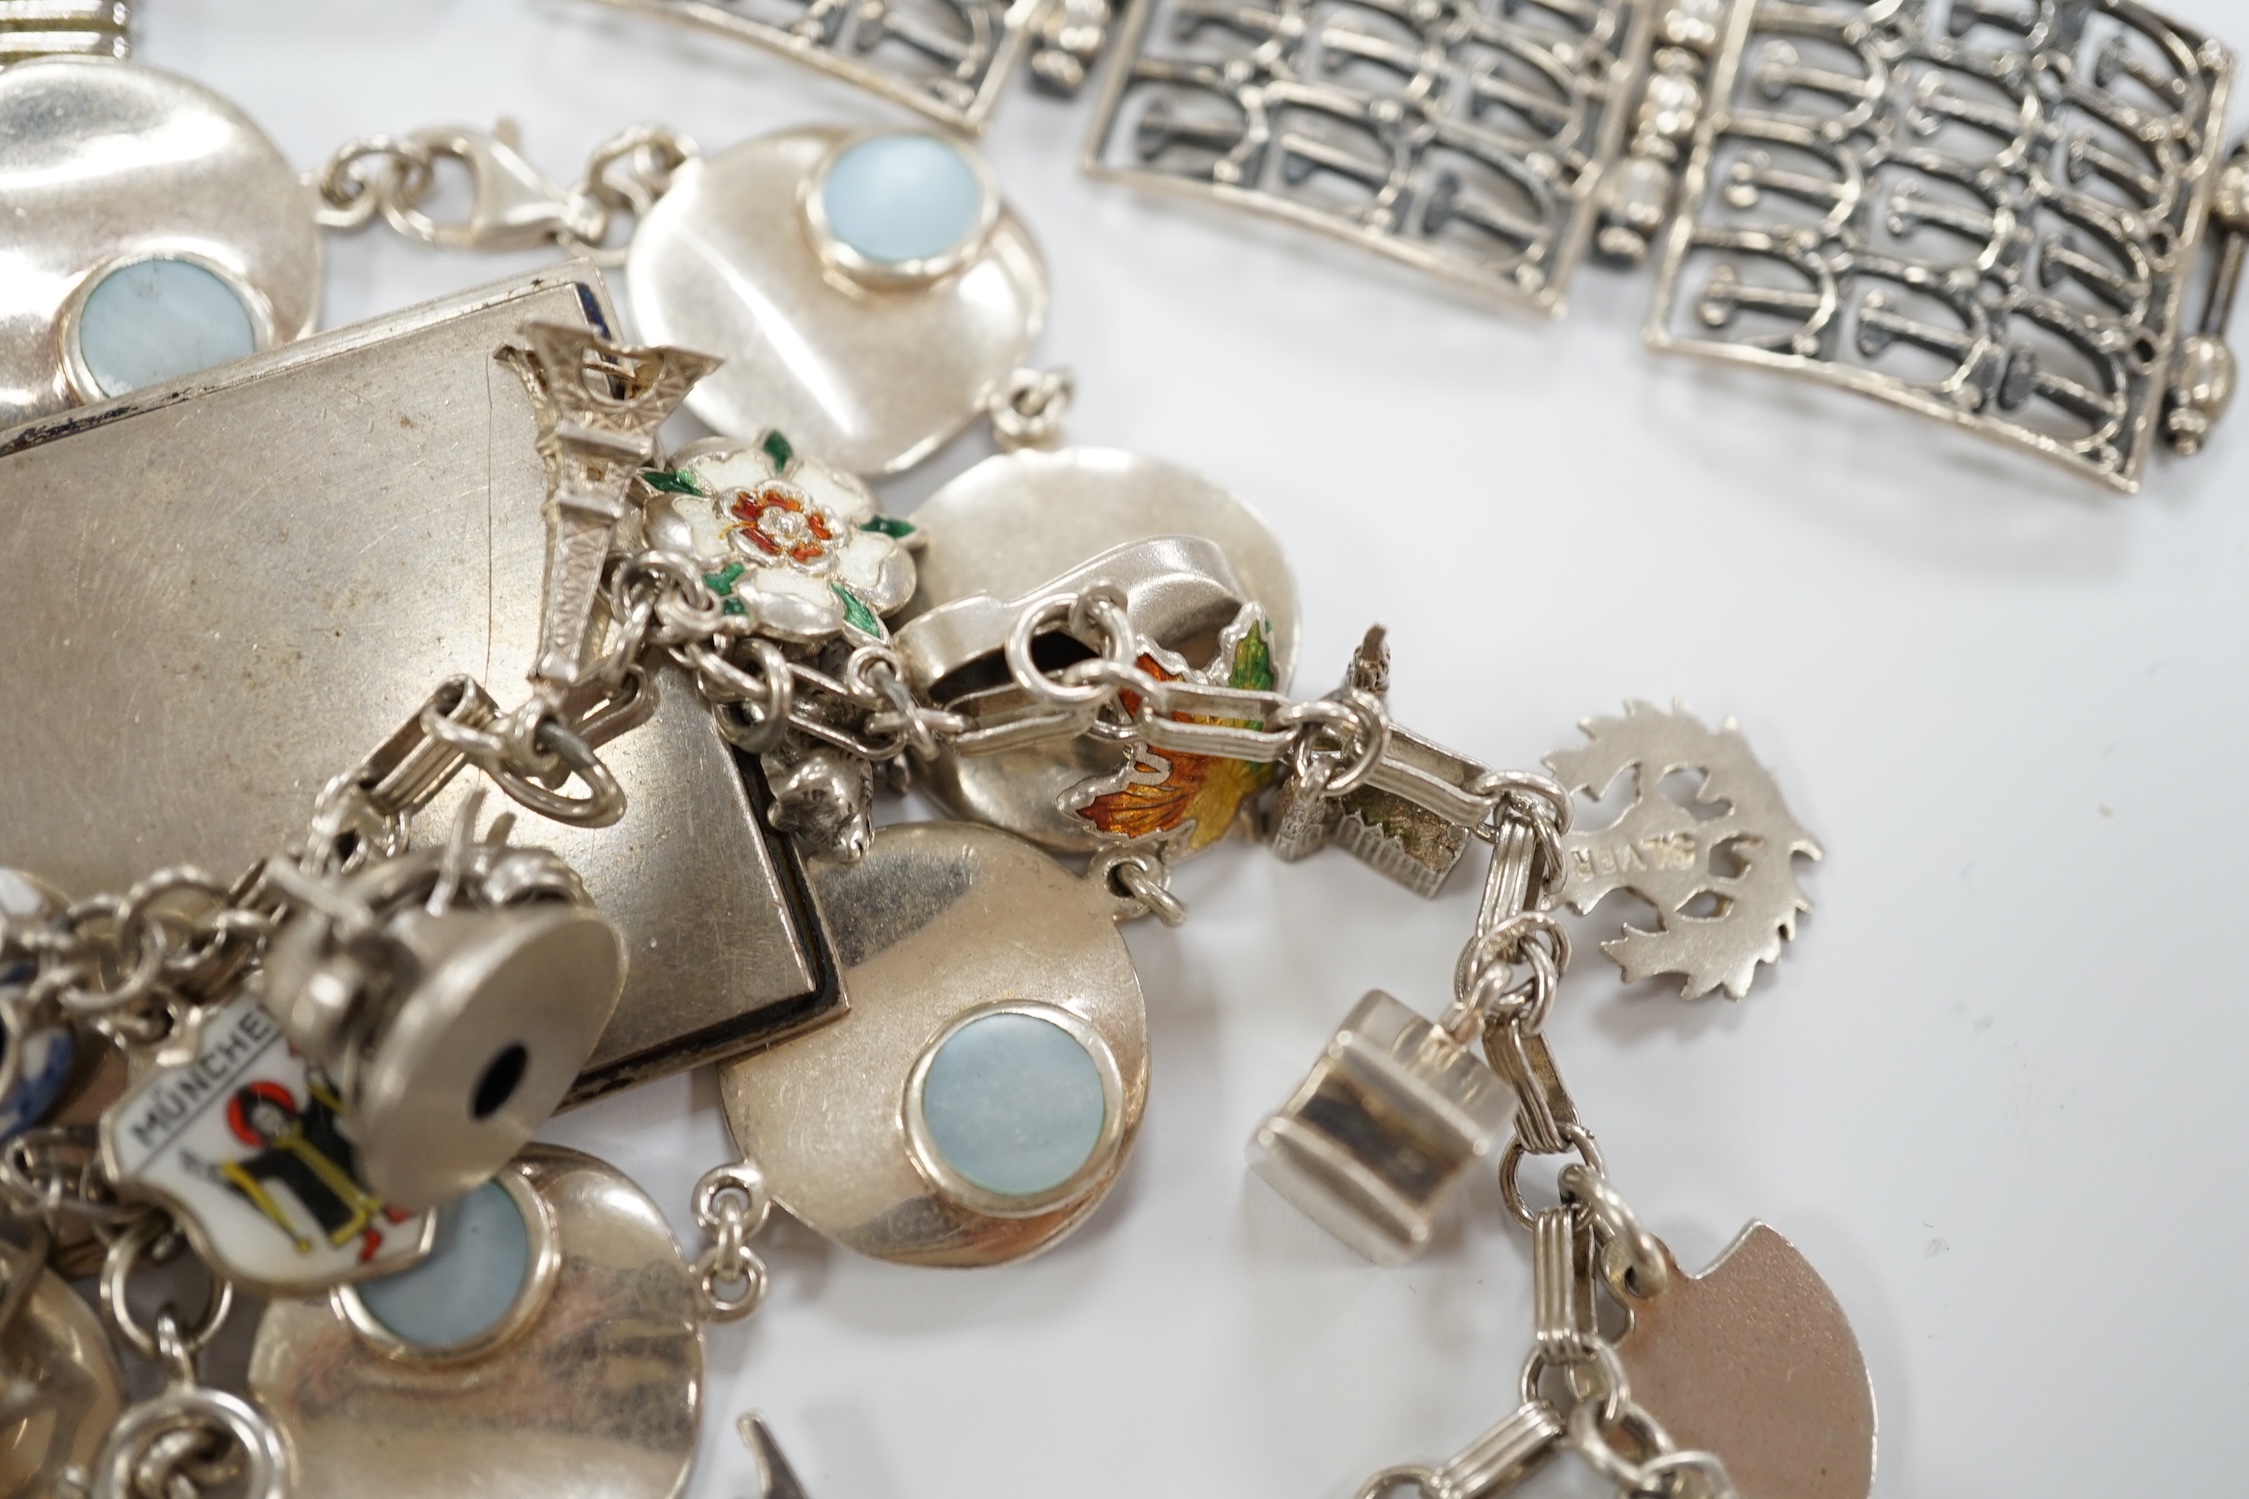 A quantity of assorted silver, white metal and sterling jewellery including brooches, cuff bracelets, charm bracelets, rings etc, gross weight 18.5oz.